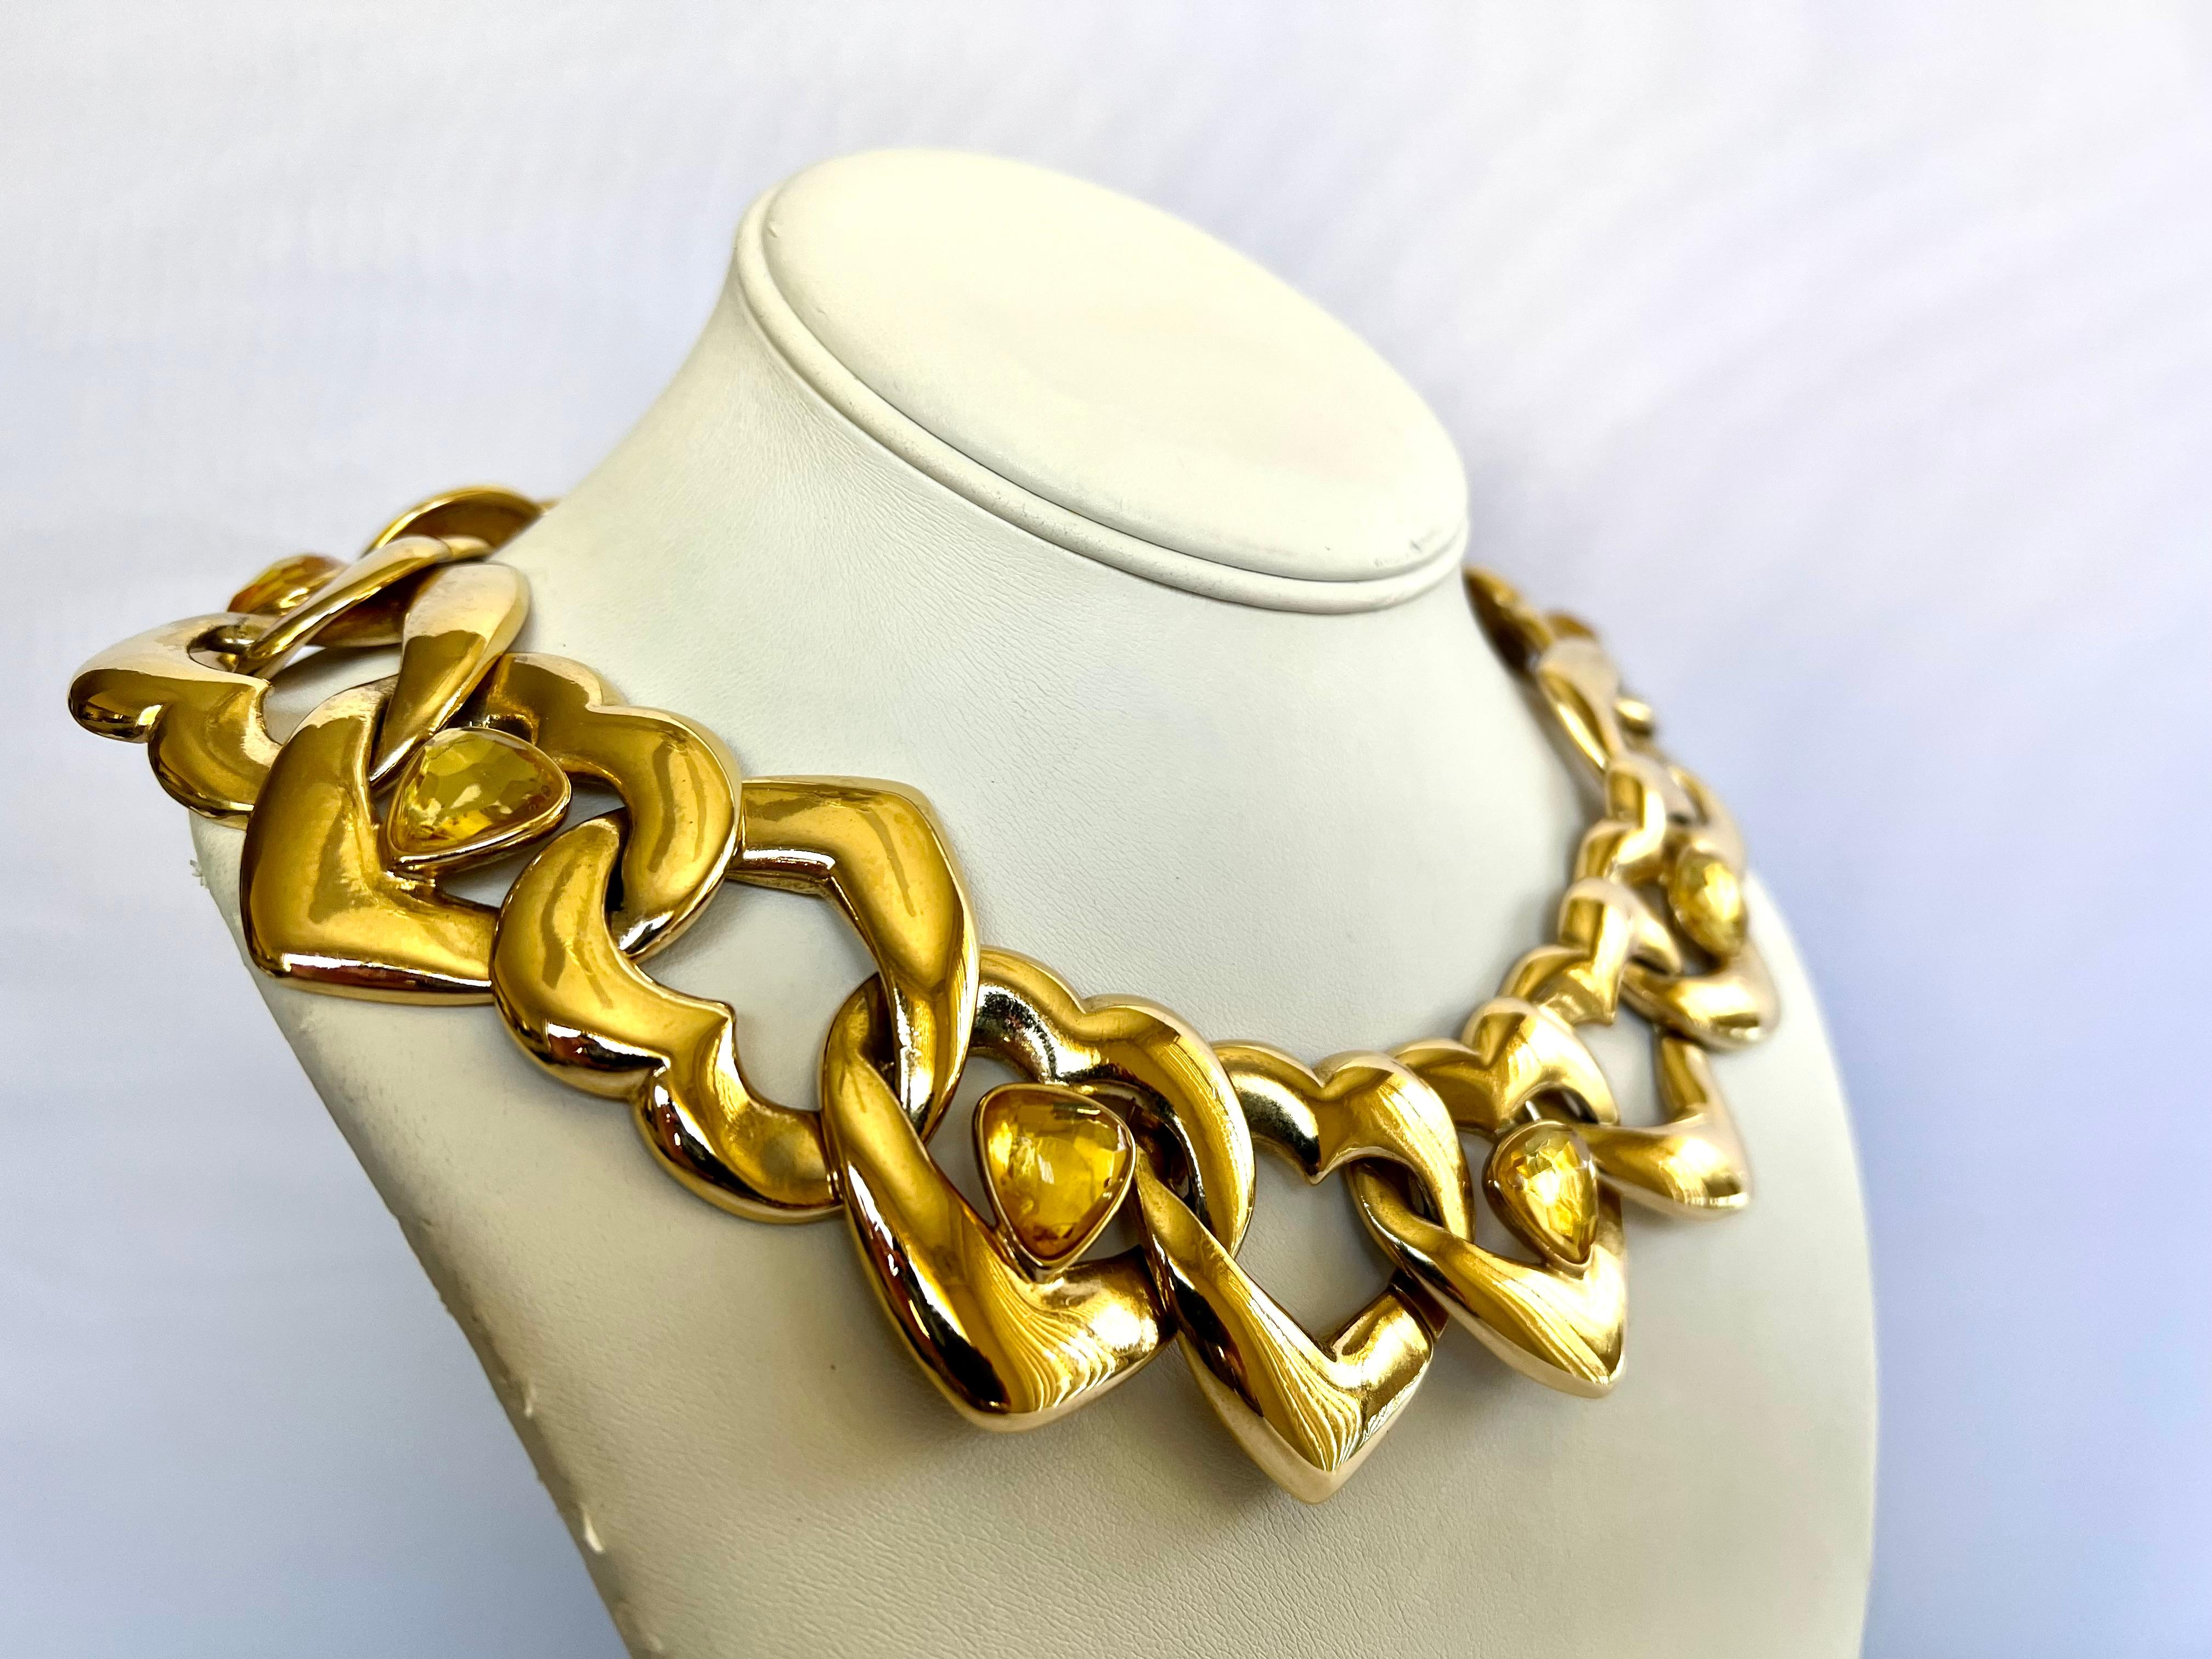 Highly collectible vintage YSL Yves Saint Laurent polished gilt heart link articulated necklace with yellow faceted acrylic embellishments. The necklace is finished with a shepherd's hook bearing the YSL stamp, made in France.